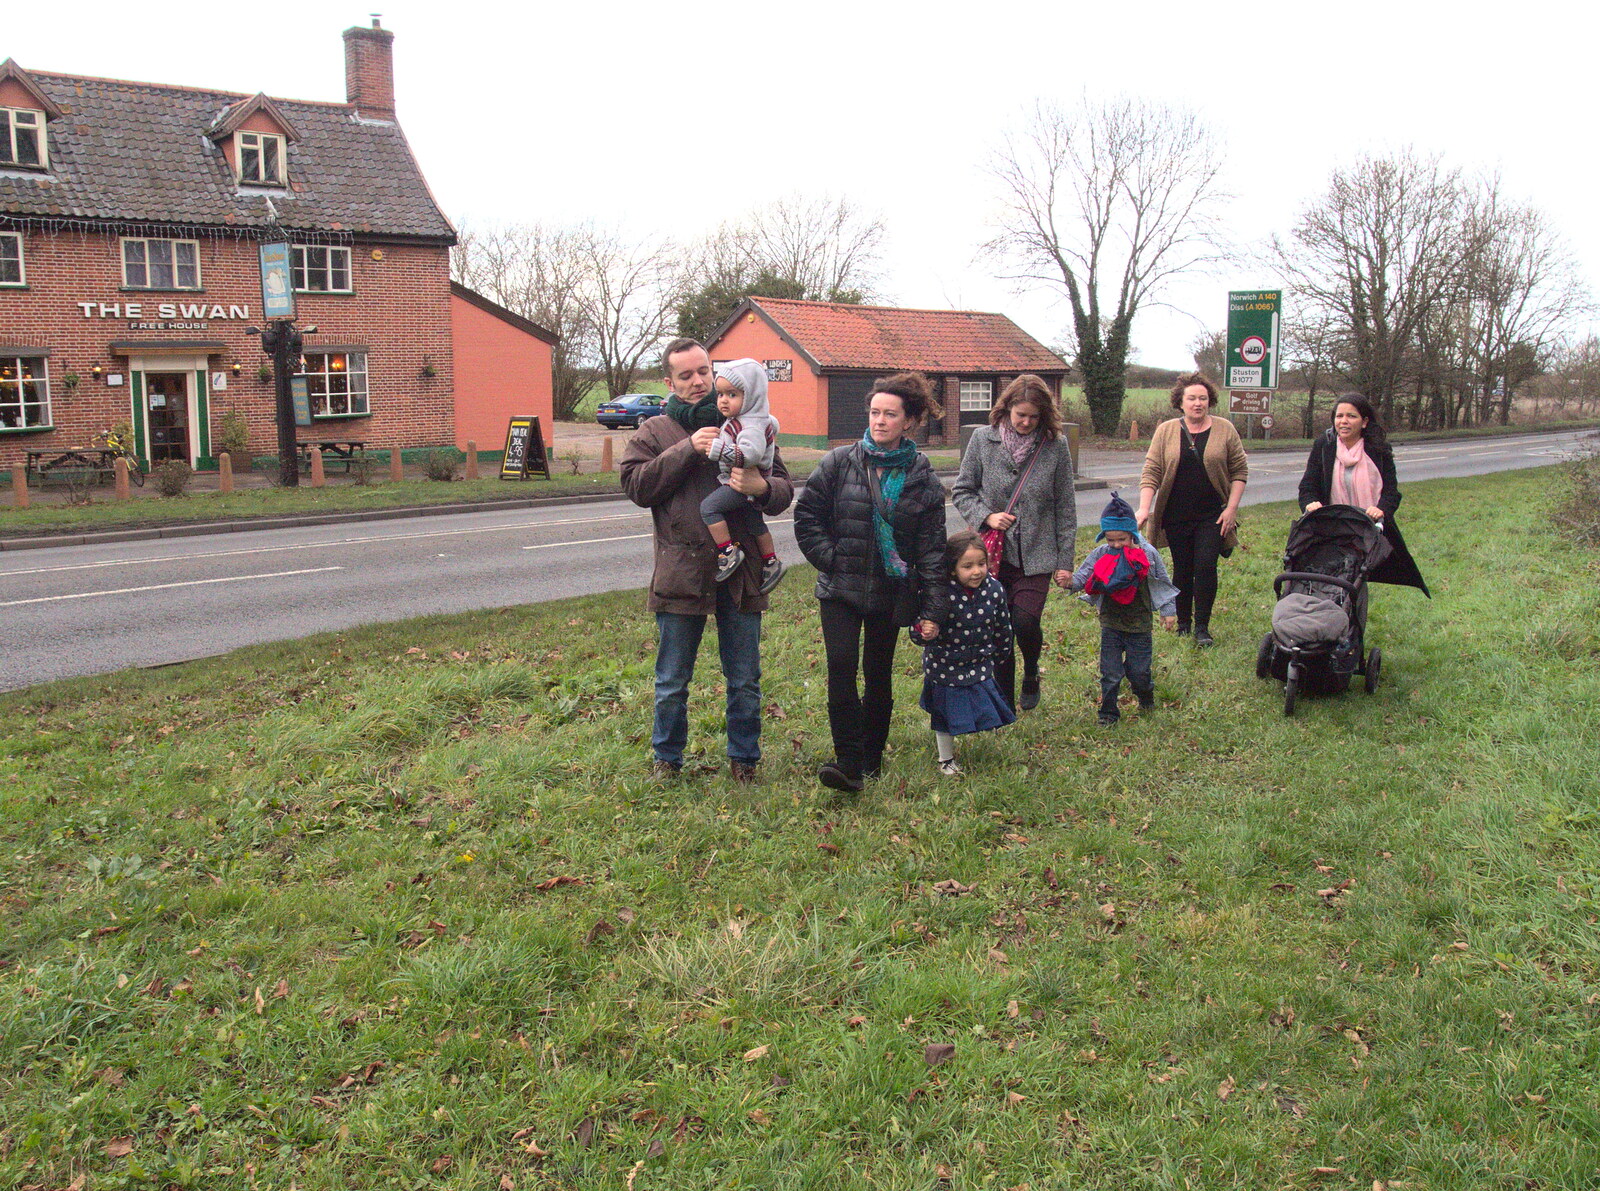 The gang cross the A140 from Christmas and All That, Brome, Suffolk - 25th December 2016